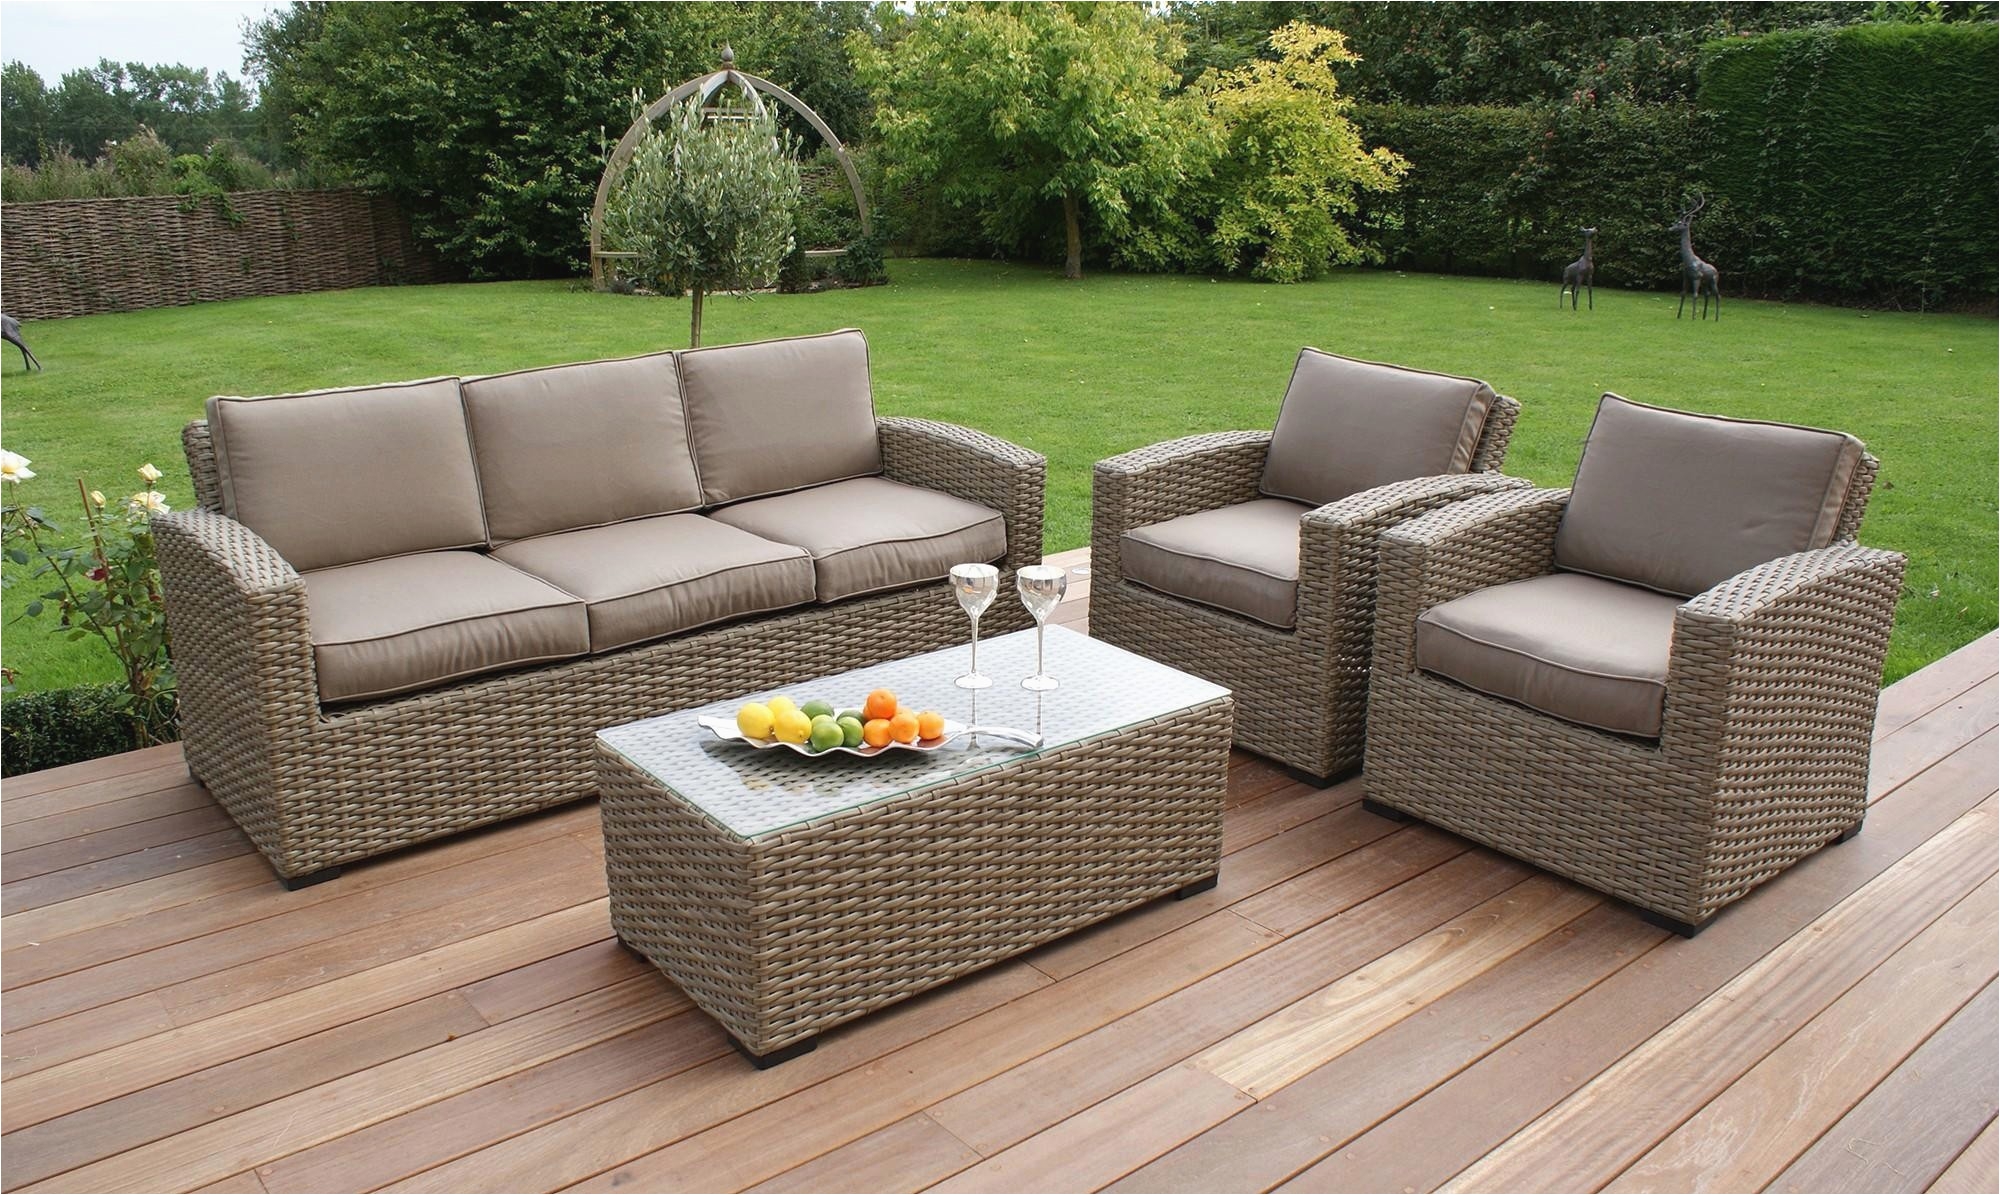 buy used patio furniture awesome outdoor sofa 0d patio chairs sale scheme outdoor patio sets